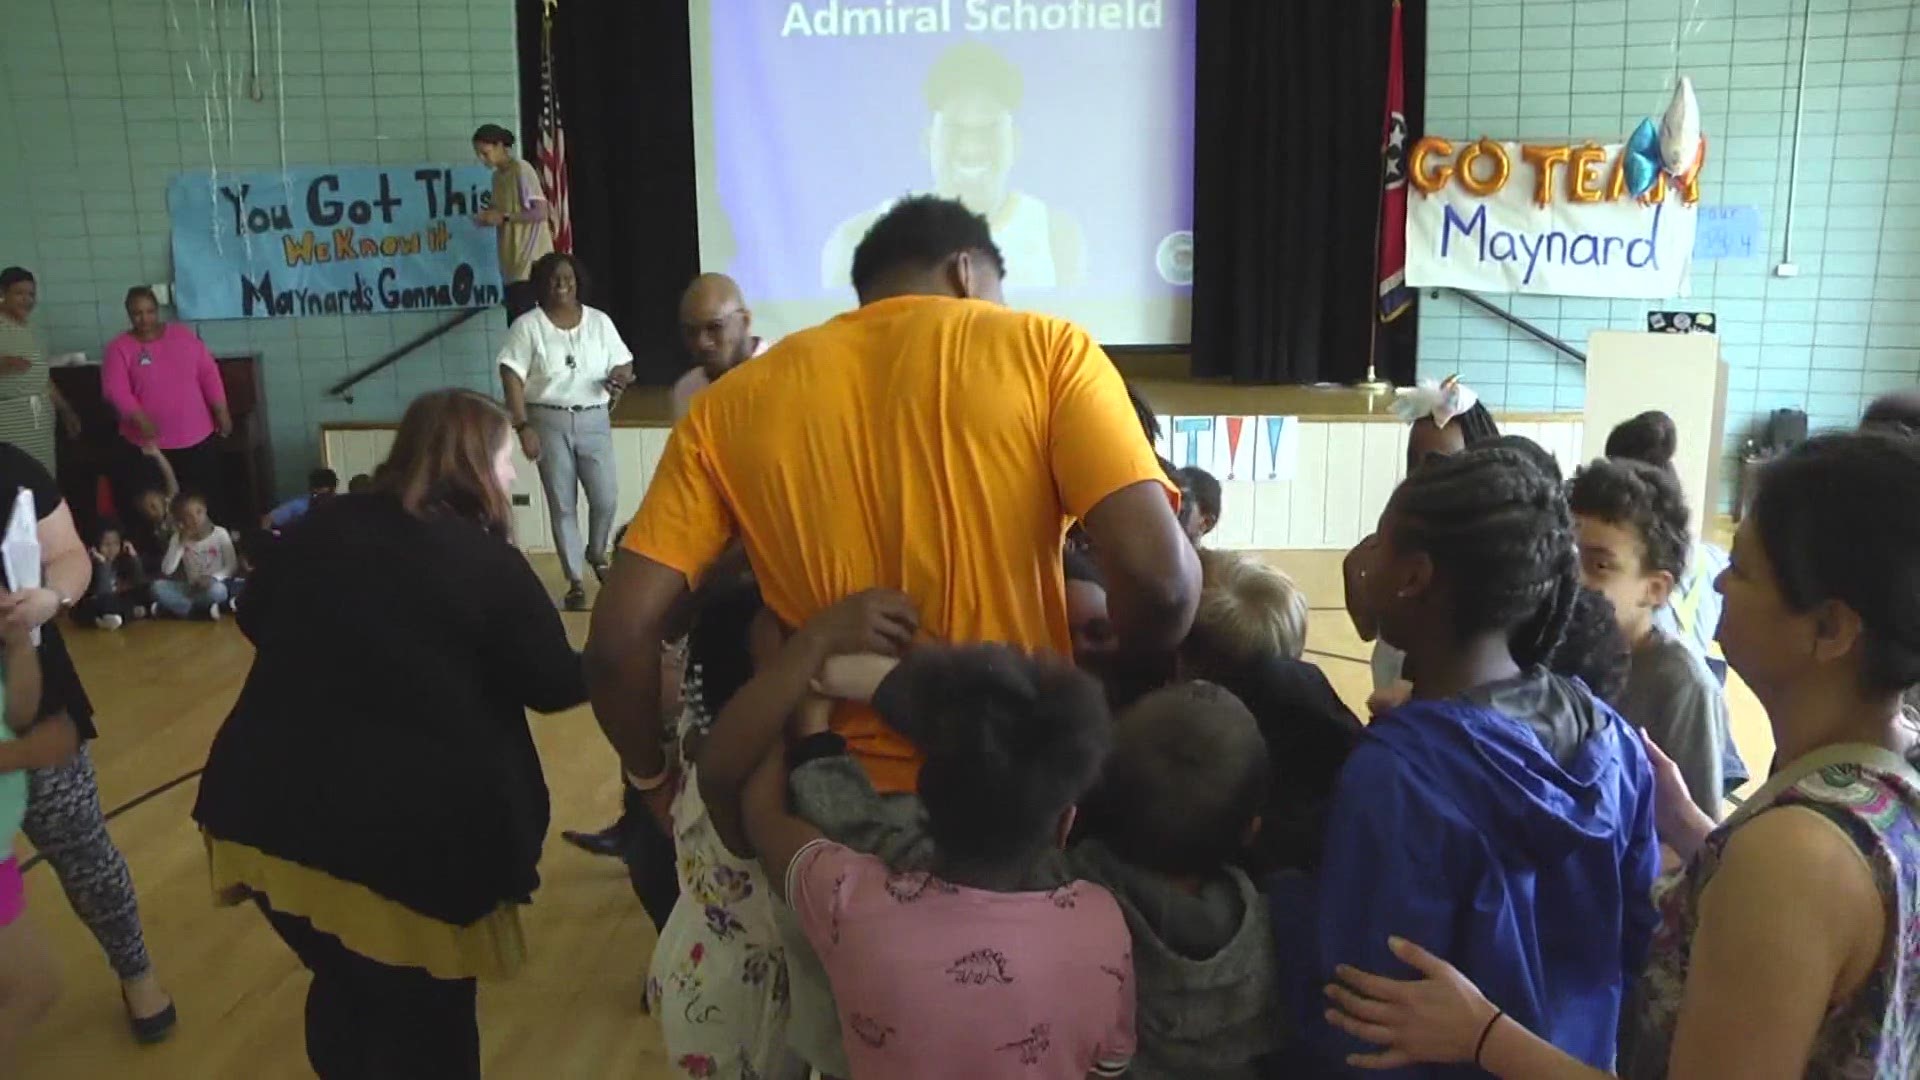 Every kid at Horace Maynard Elementary was riveted by the UT basketball star when he visited the school on Thursday.